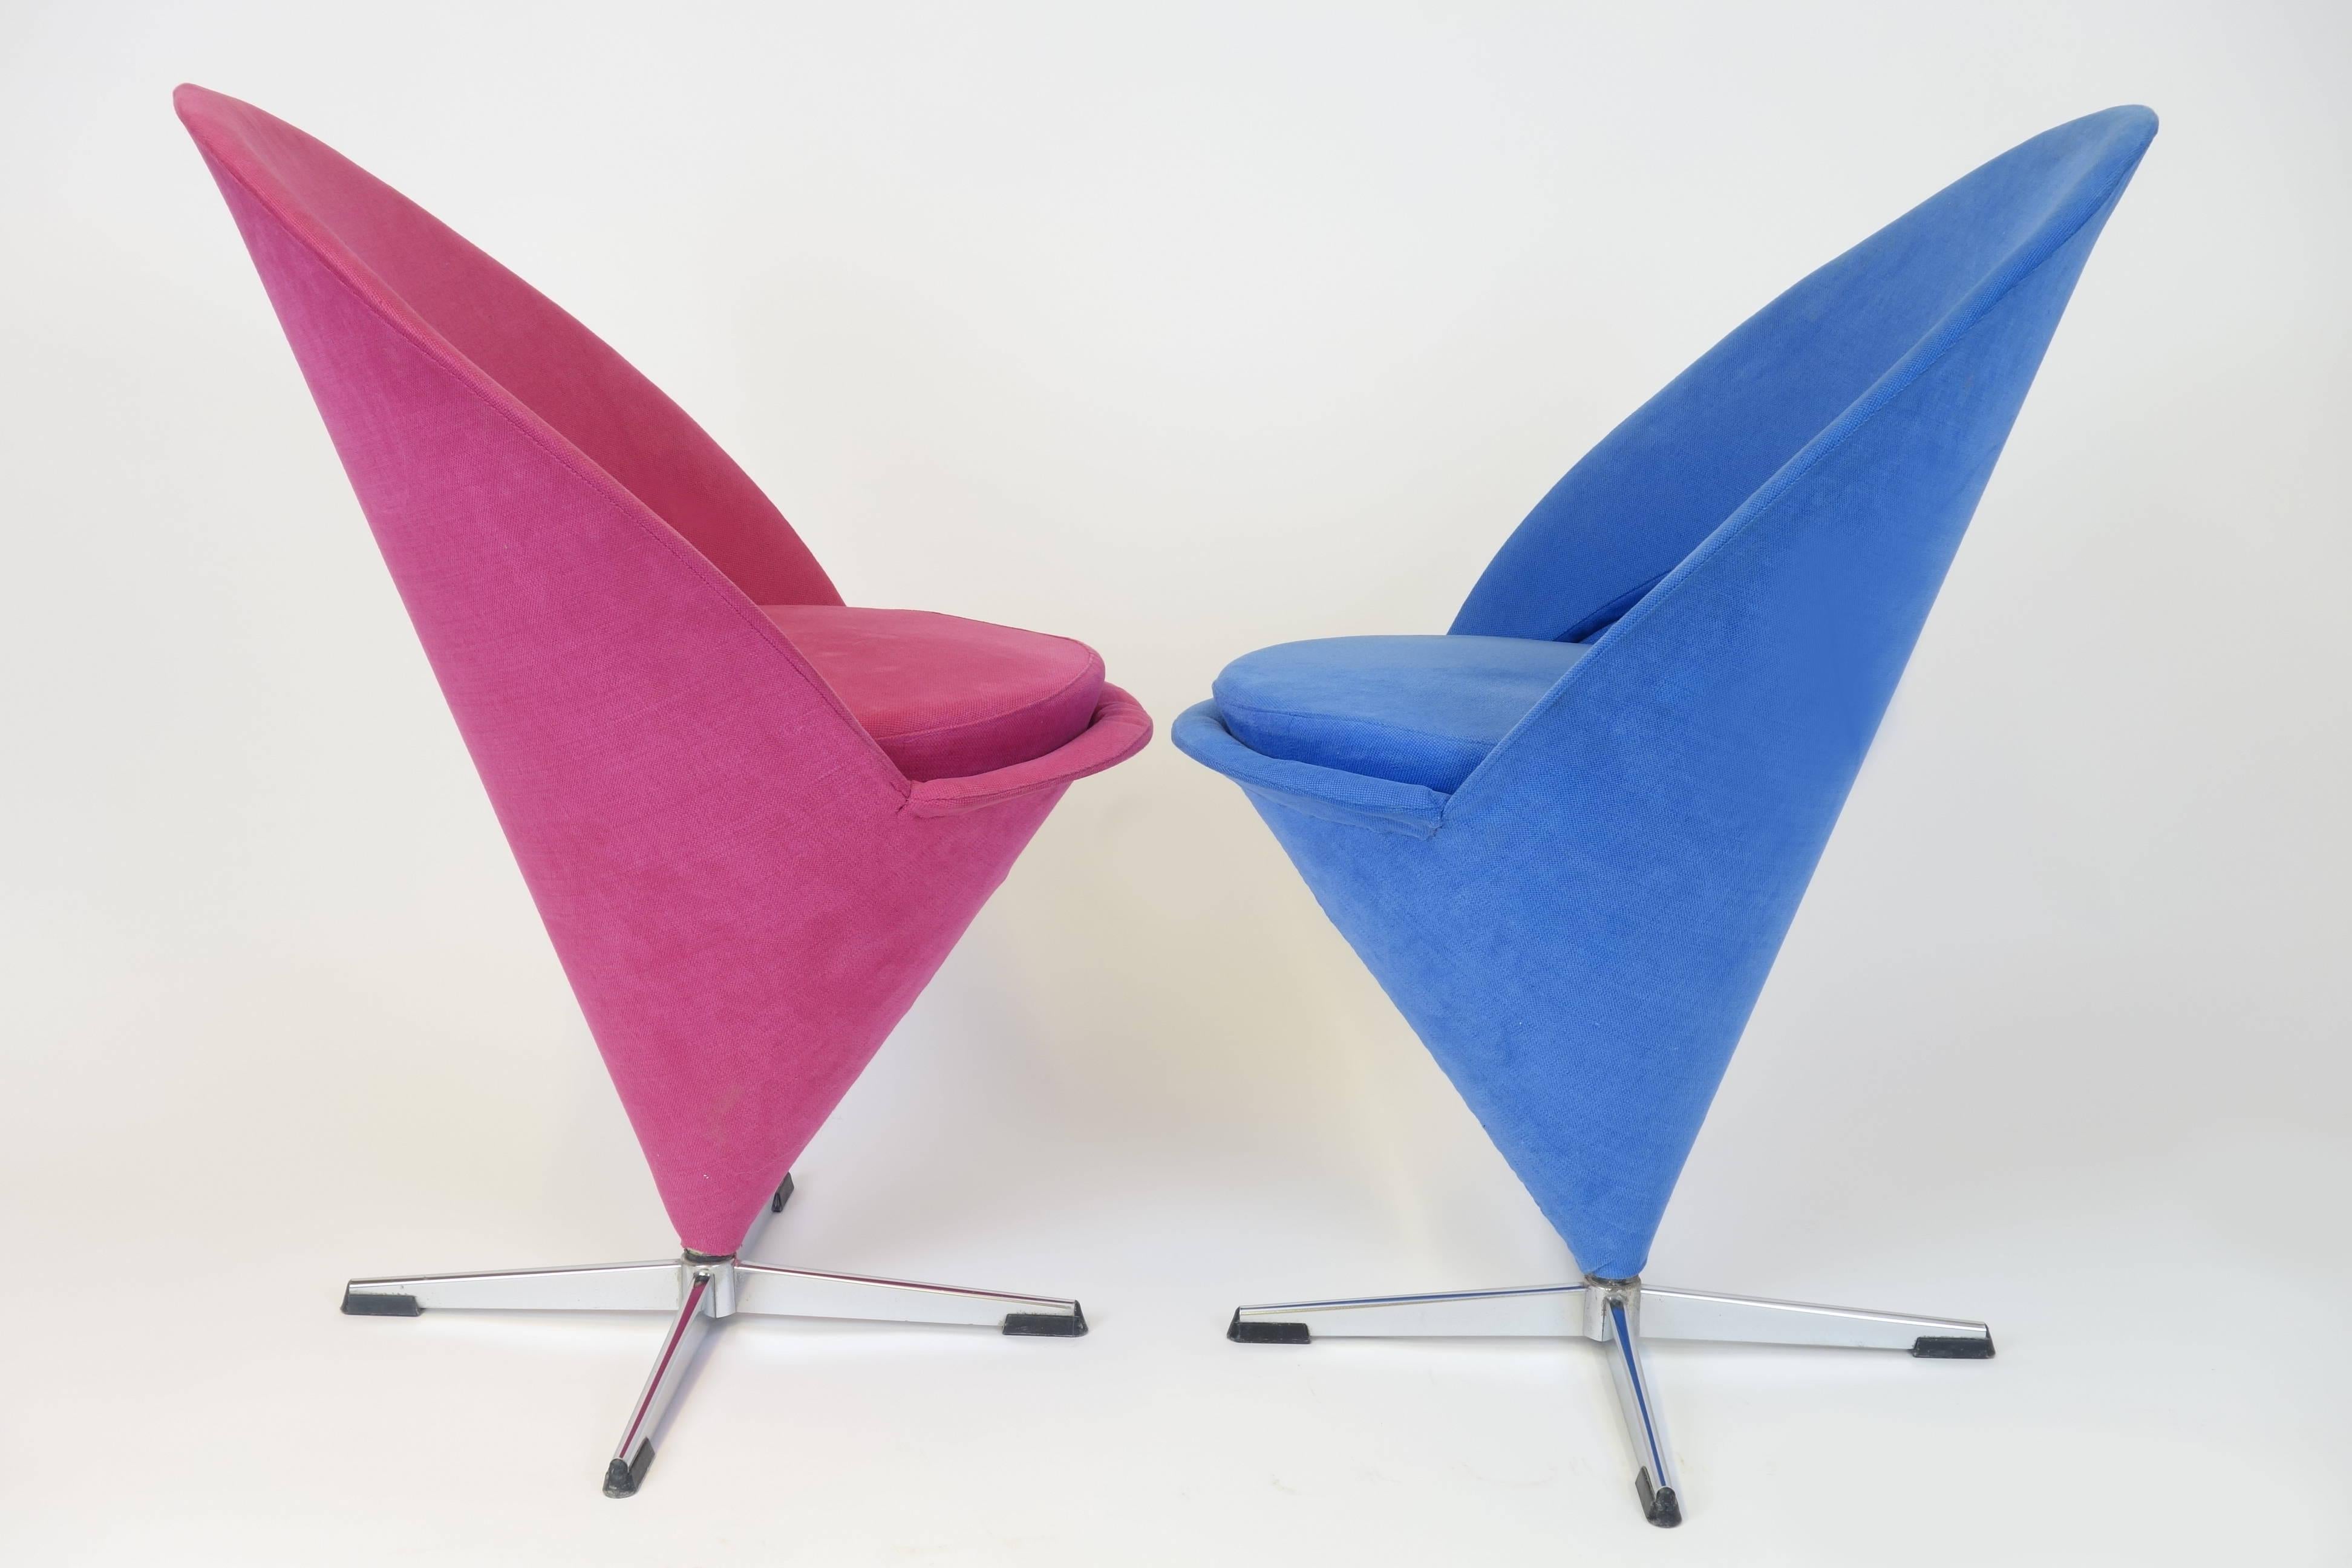 Mid-Century Modern Original K1 Cone Chairs Design Blue Red by Verner Panton, Denmark, 1950s For Sale